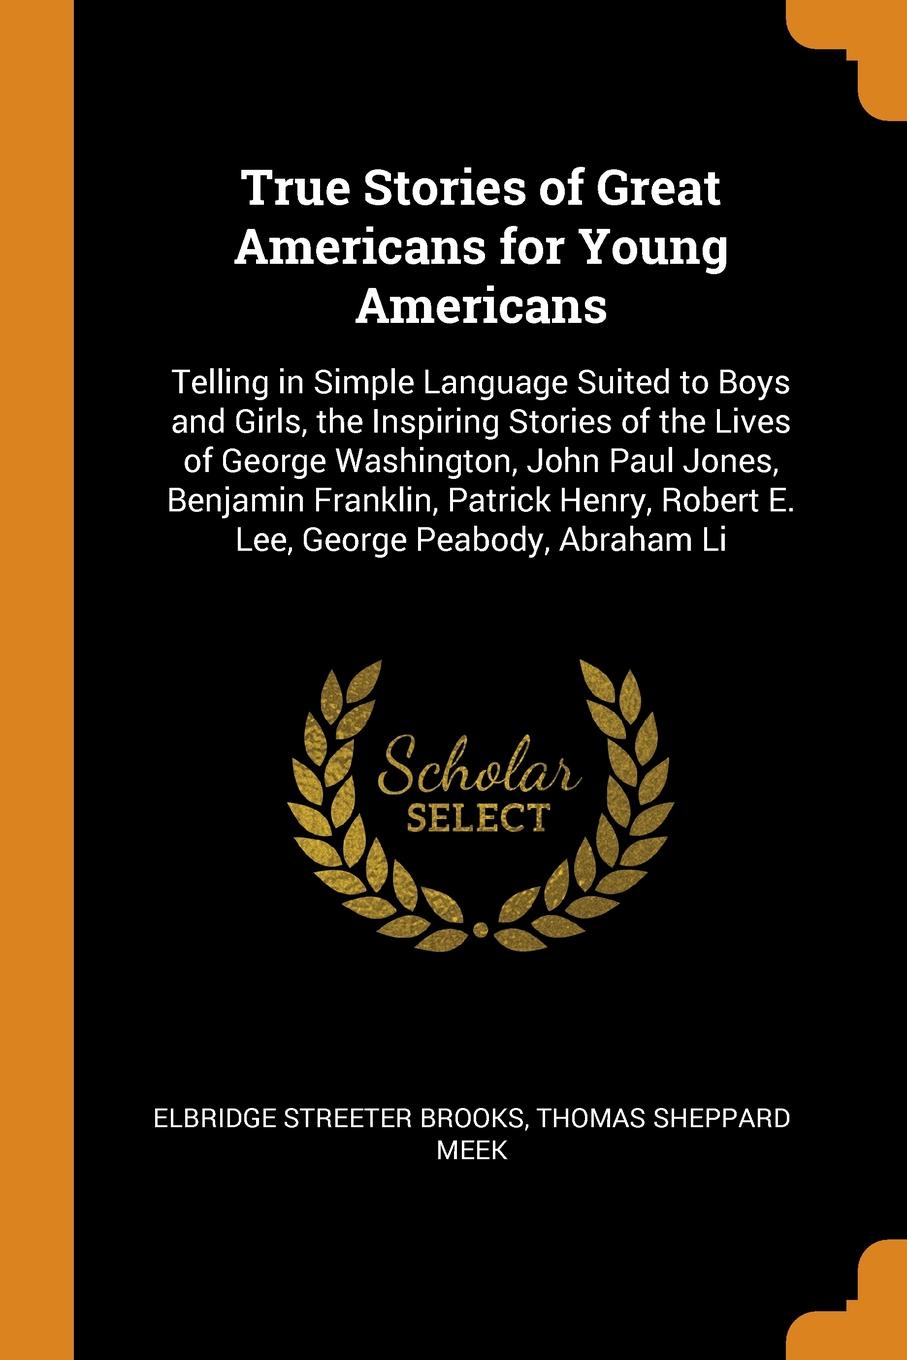 True Stories of Great Americans for Young Americans. Telling in Simple Language Suited to Boys and Girls, the Inspiring Stories of the Lives of George Washington, John Paul Jones, Benjamin Franklin, Patrick Henry, Robert E. Lee, George Peabody, Ab...